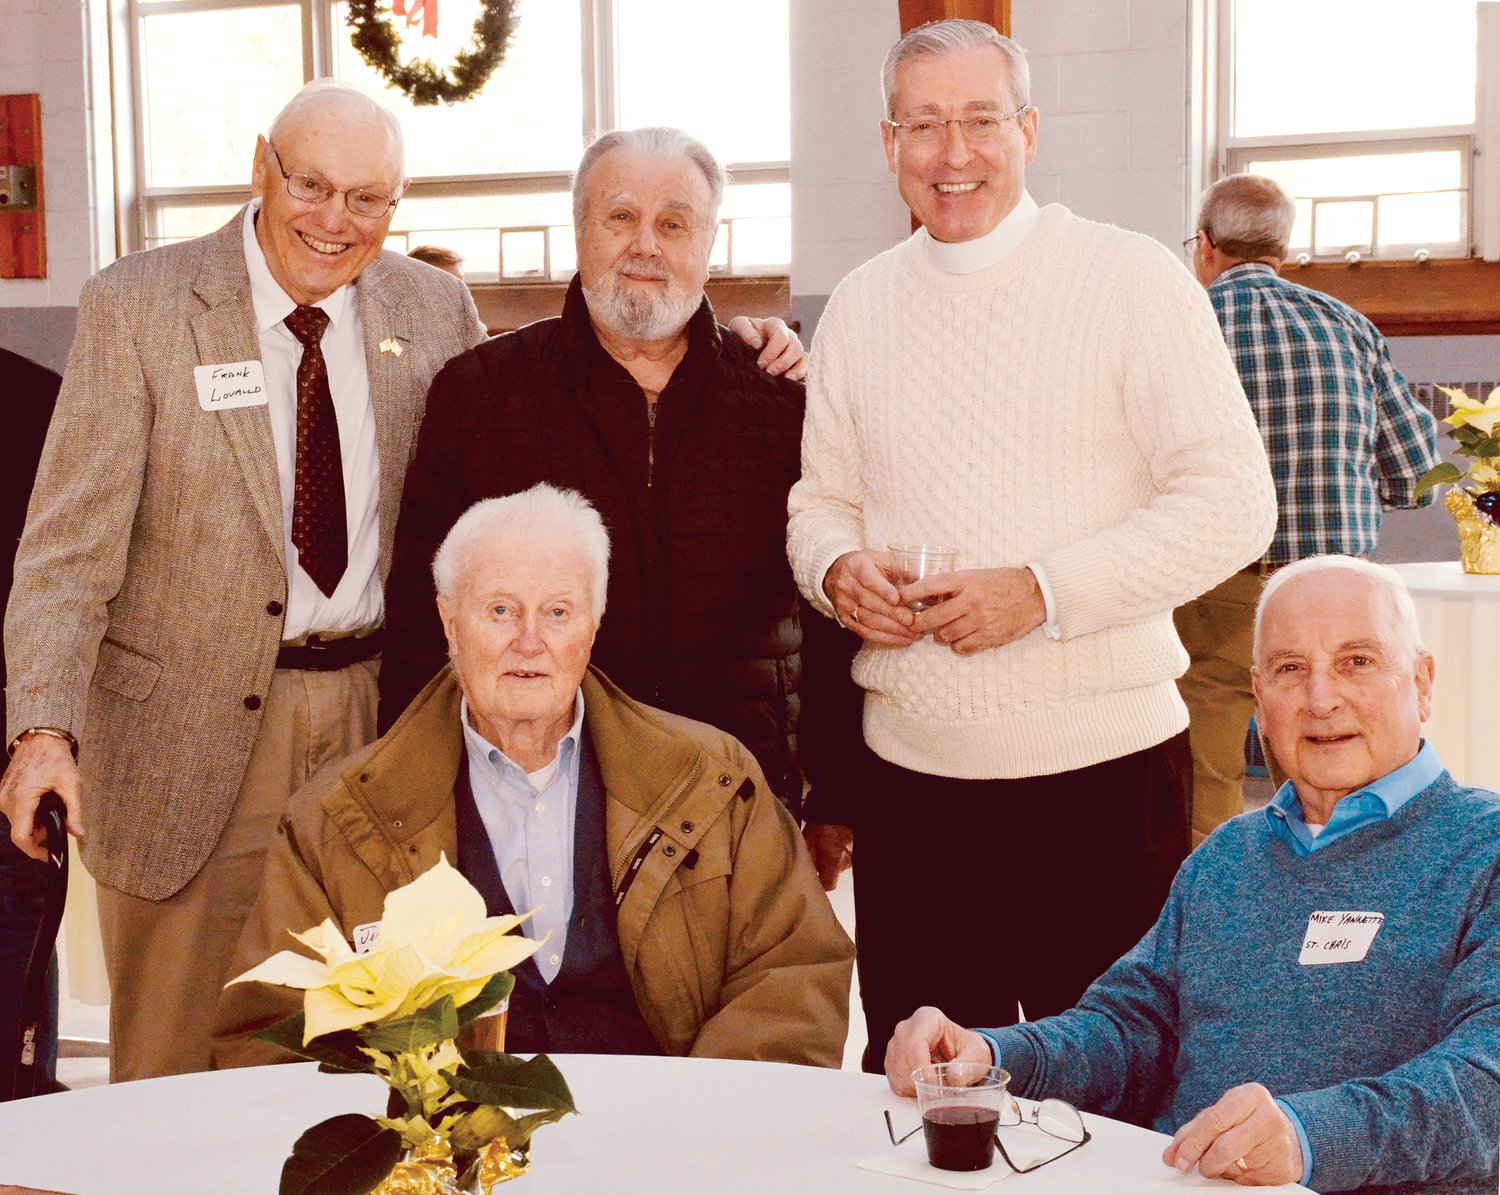 Father Douglas Crawford, standing at right, the pastor of both parishes, joins parishioners Frank Lovallo and Joe Scala, both standing, and John Carroll and Mike Yannette, both seated.